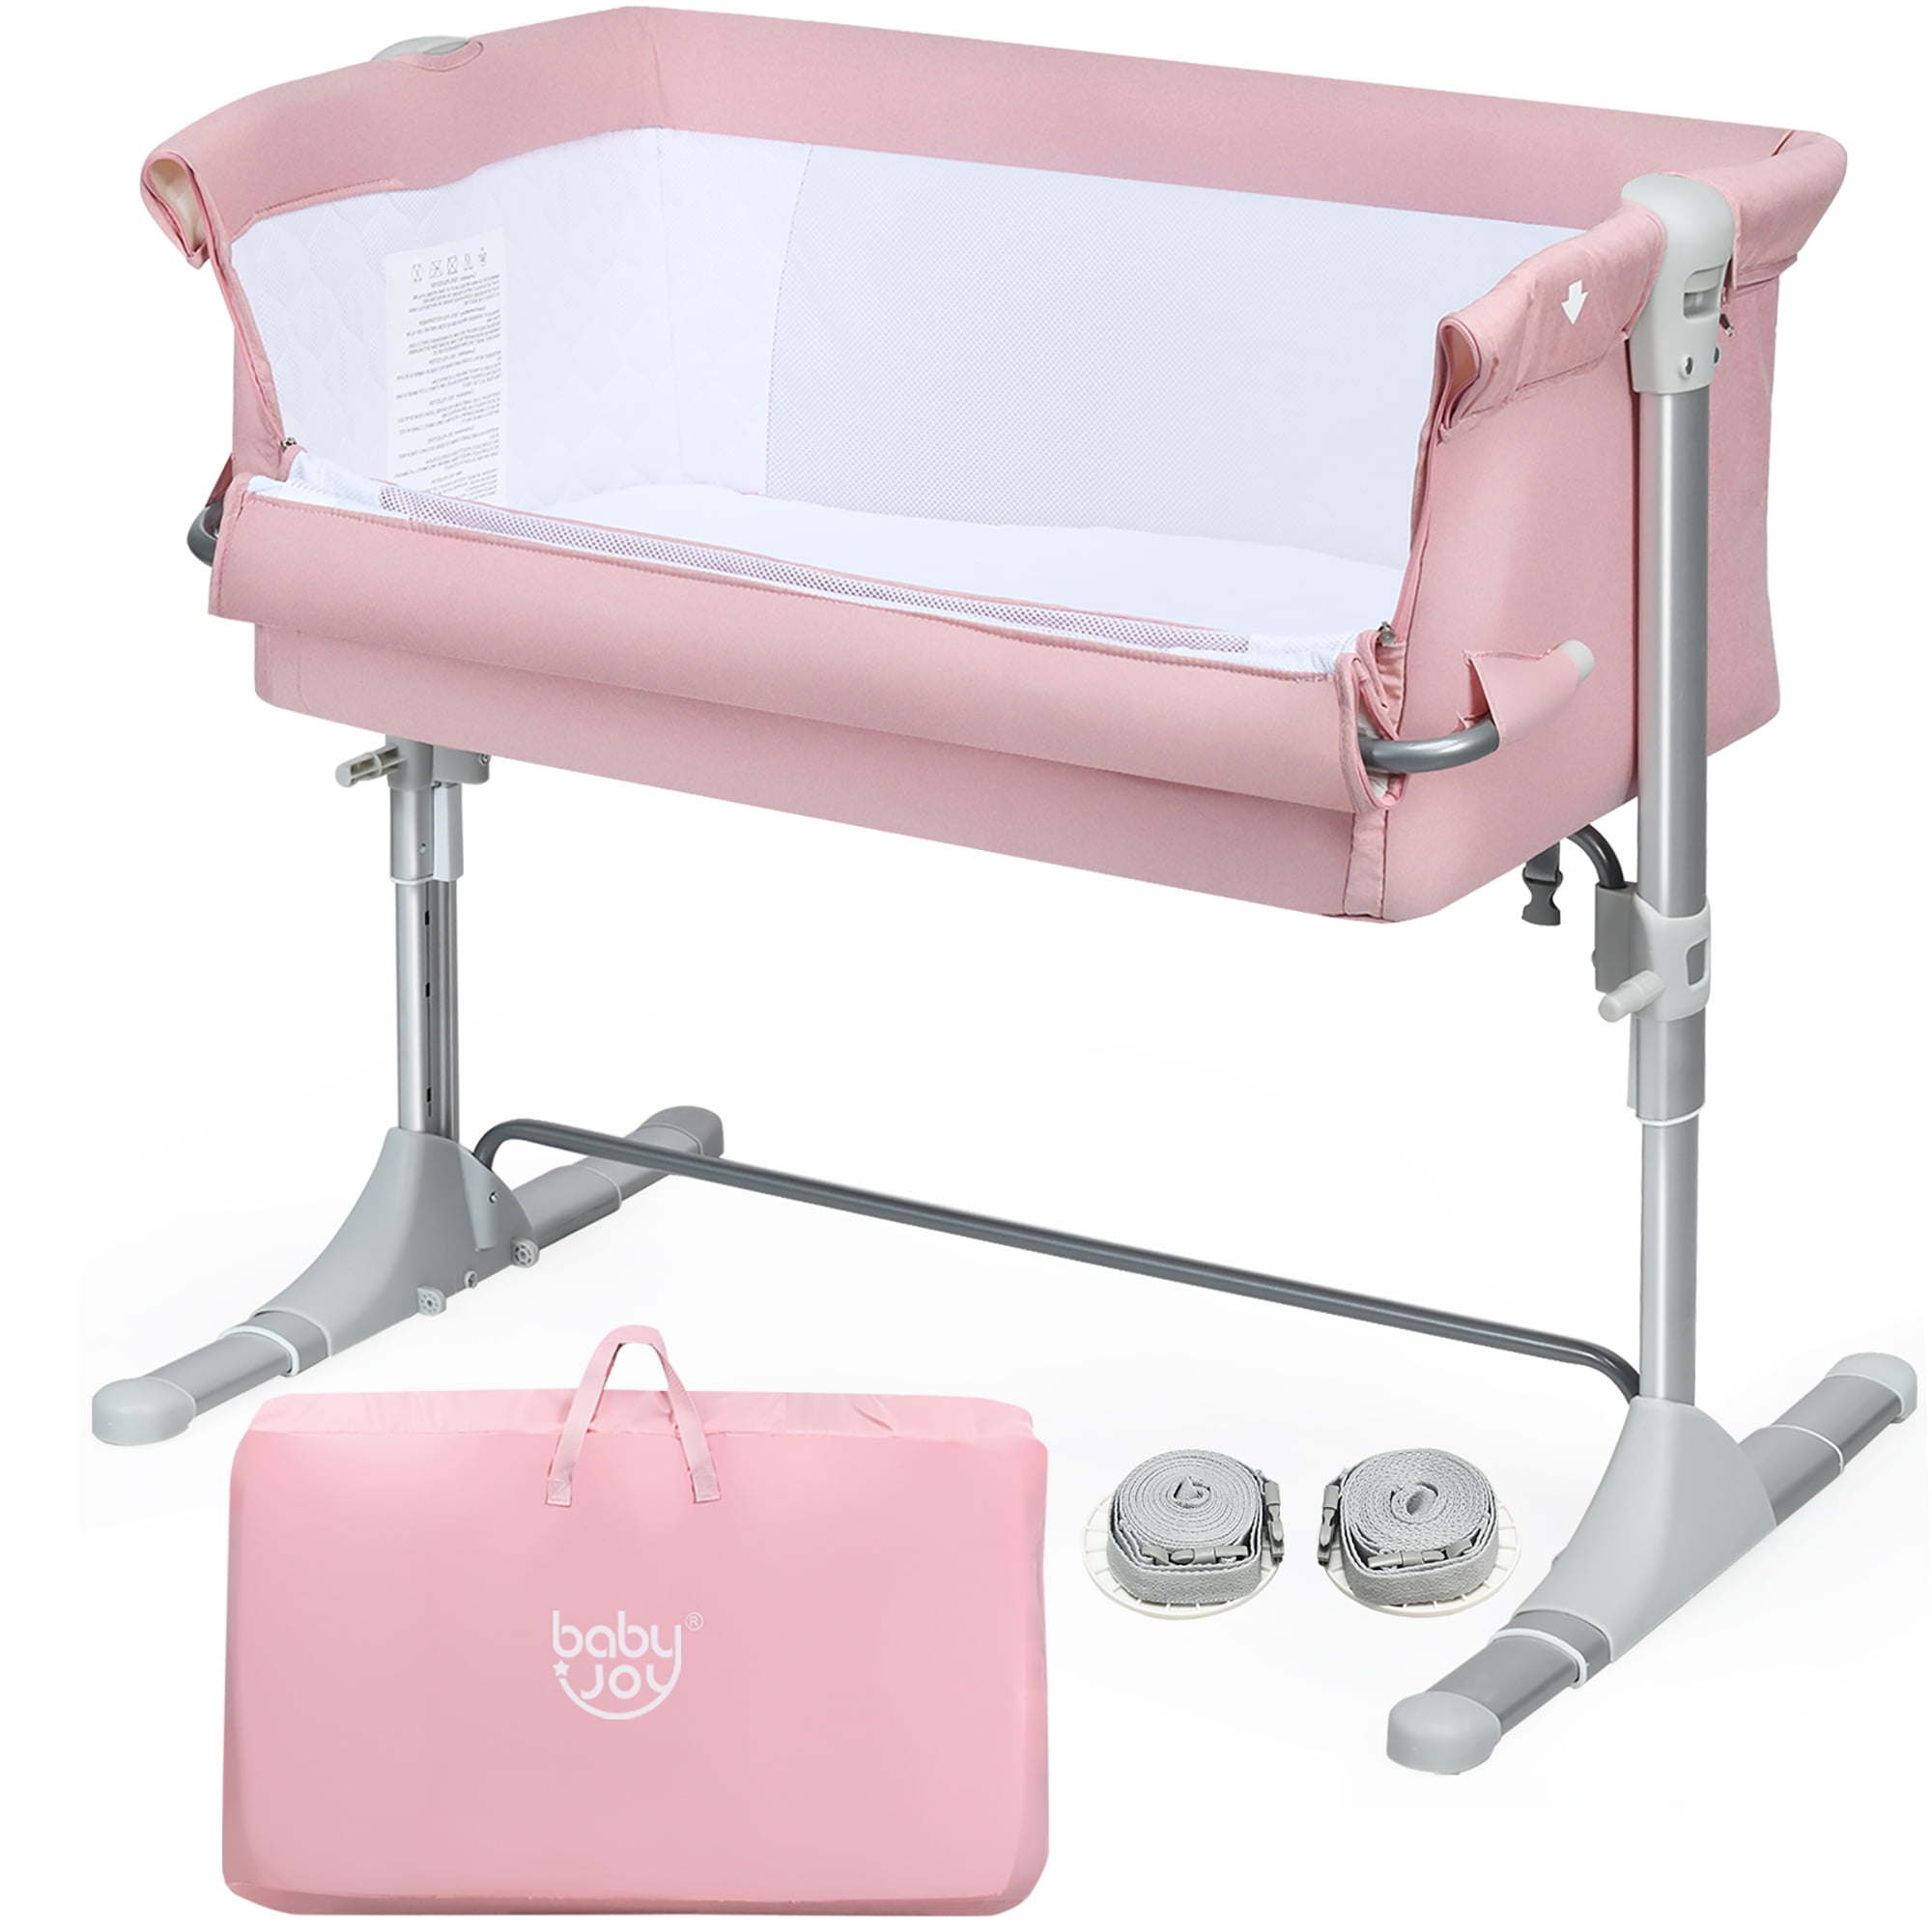 Baby Bedside Crib Portable Foldable Travel Cot Bed  Mattress Mesh W/Carry Bag 